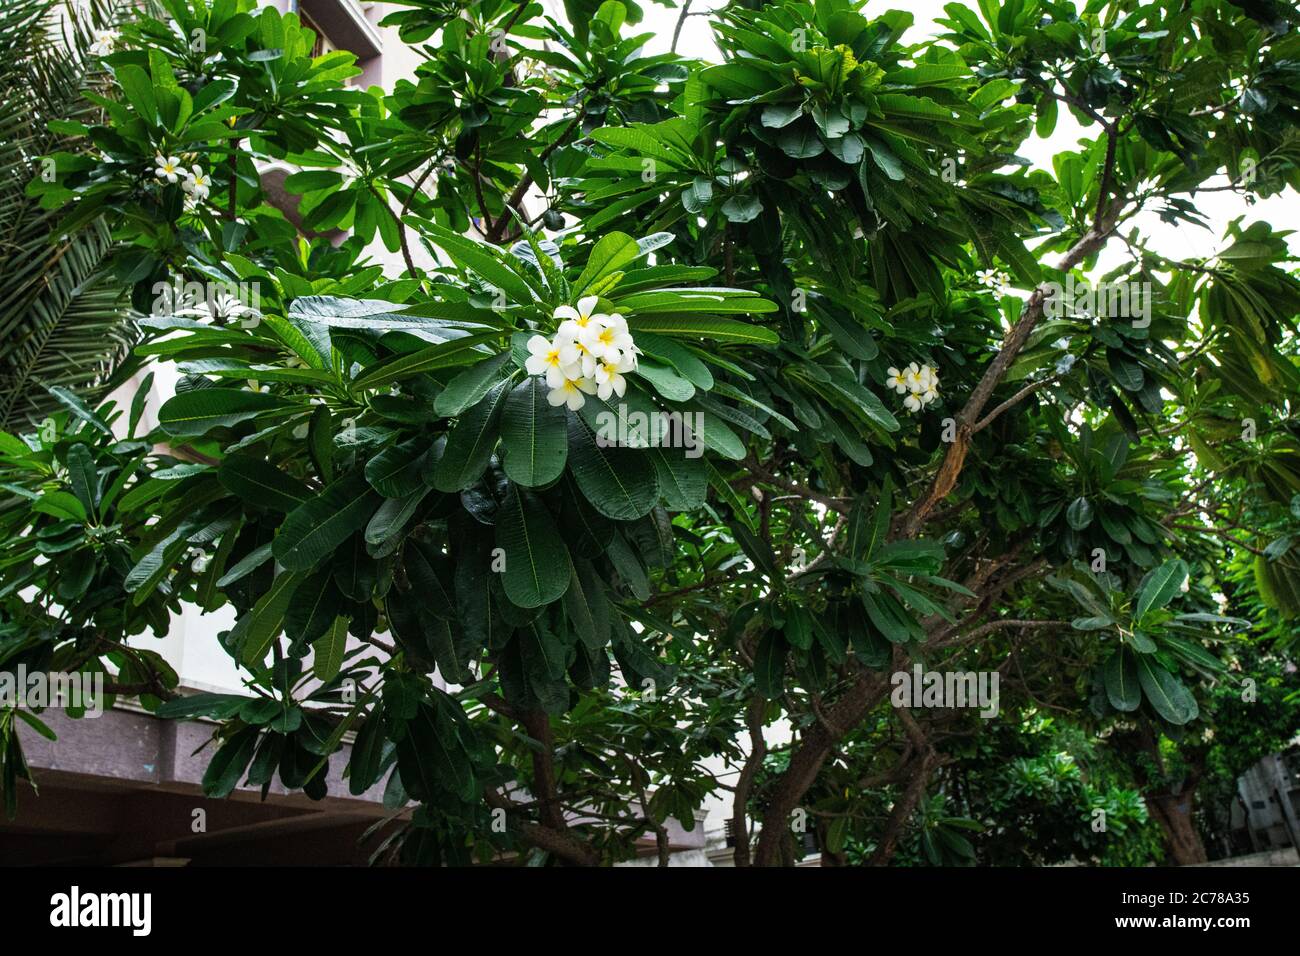 White fragrant flower with green leaves. Frangipani flower is known as Plumeria flower, bouquet on branch tree in the morning. Stock Photo